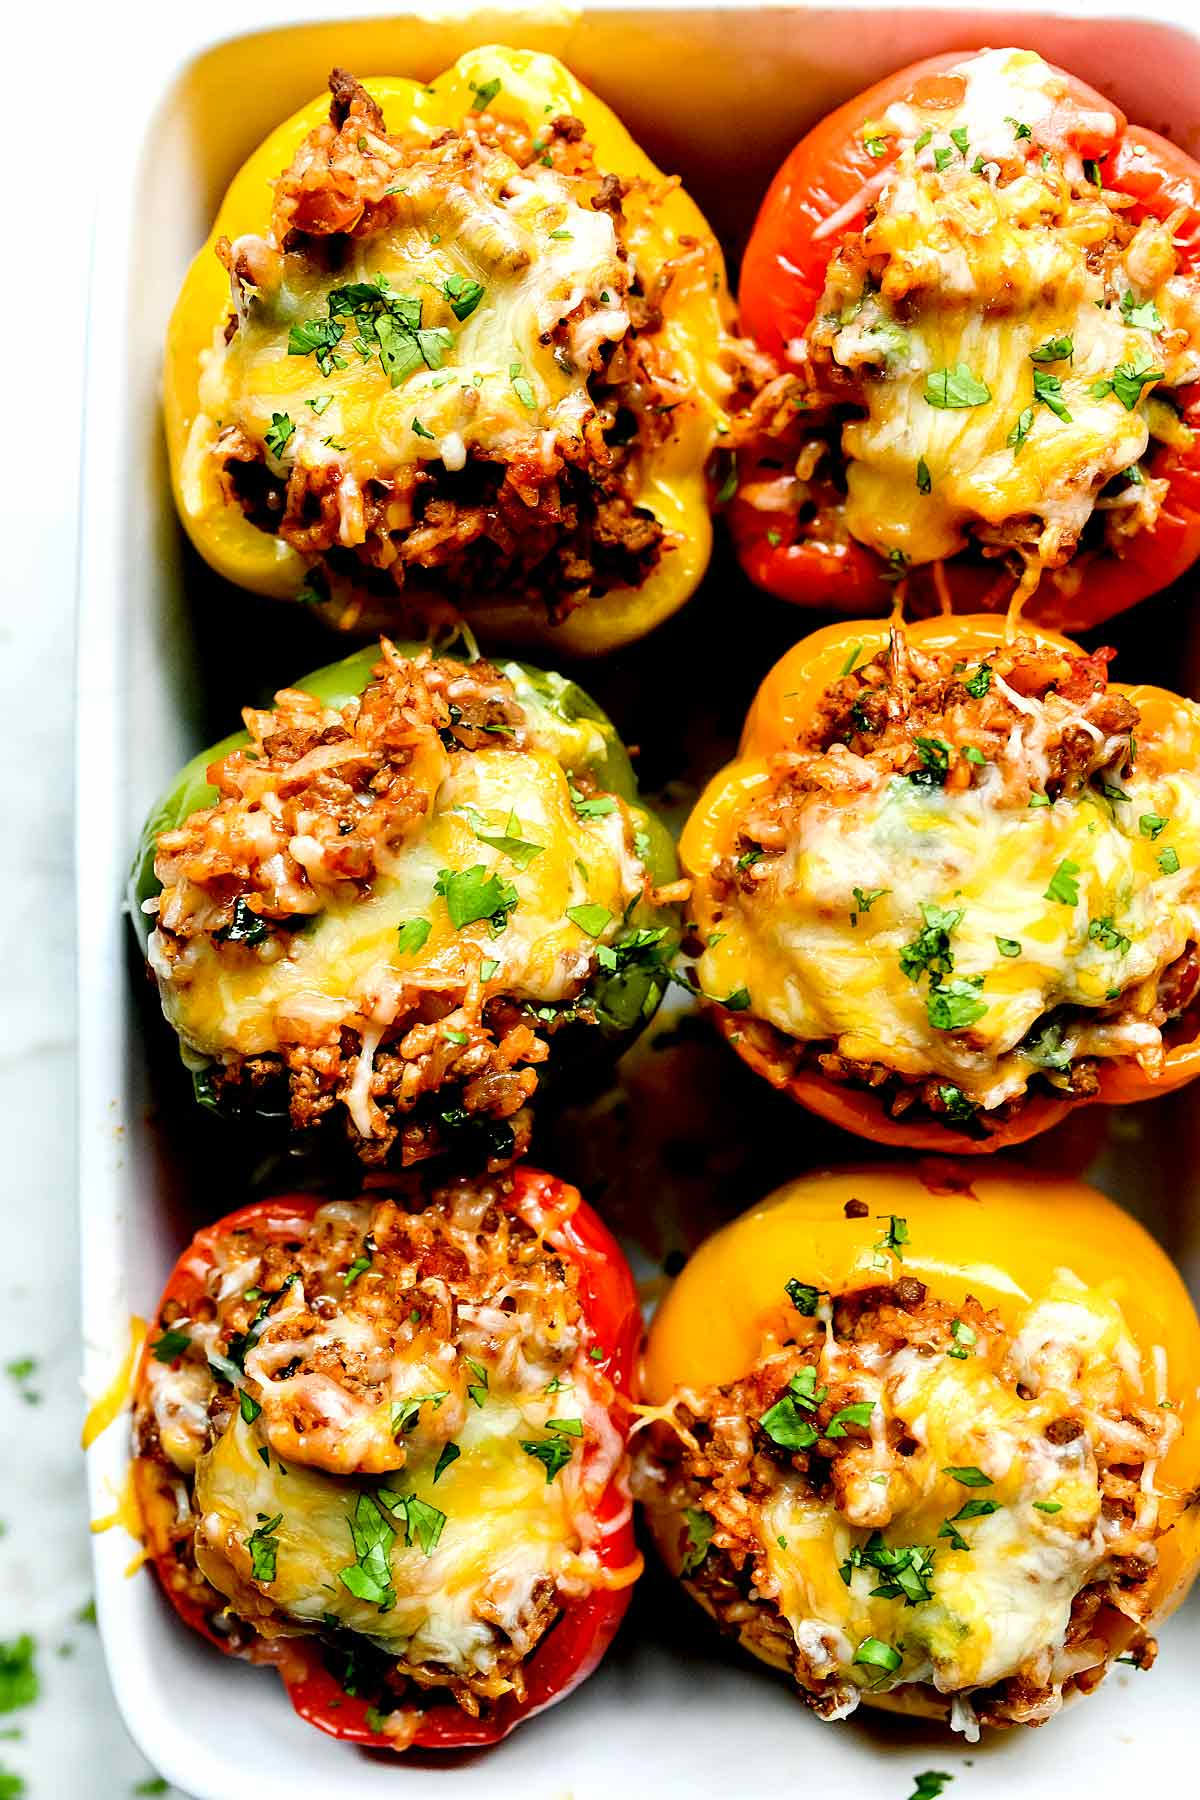 Mexican Stuffed Peppers with Cheese | foodiecrush.com #beef #peppers #stuffedpeppers #healthy #easy #mexican